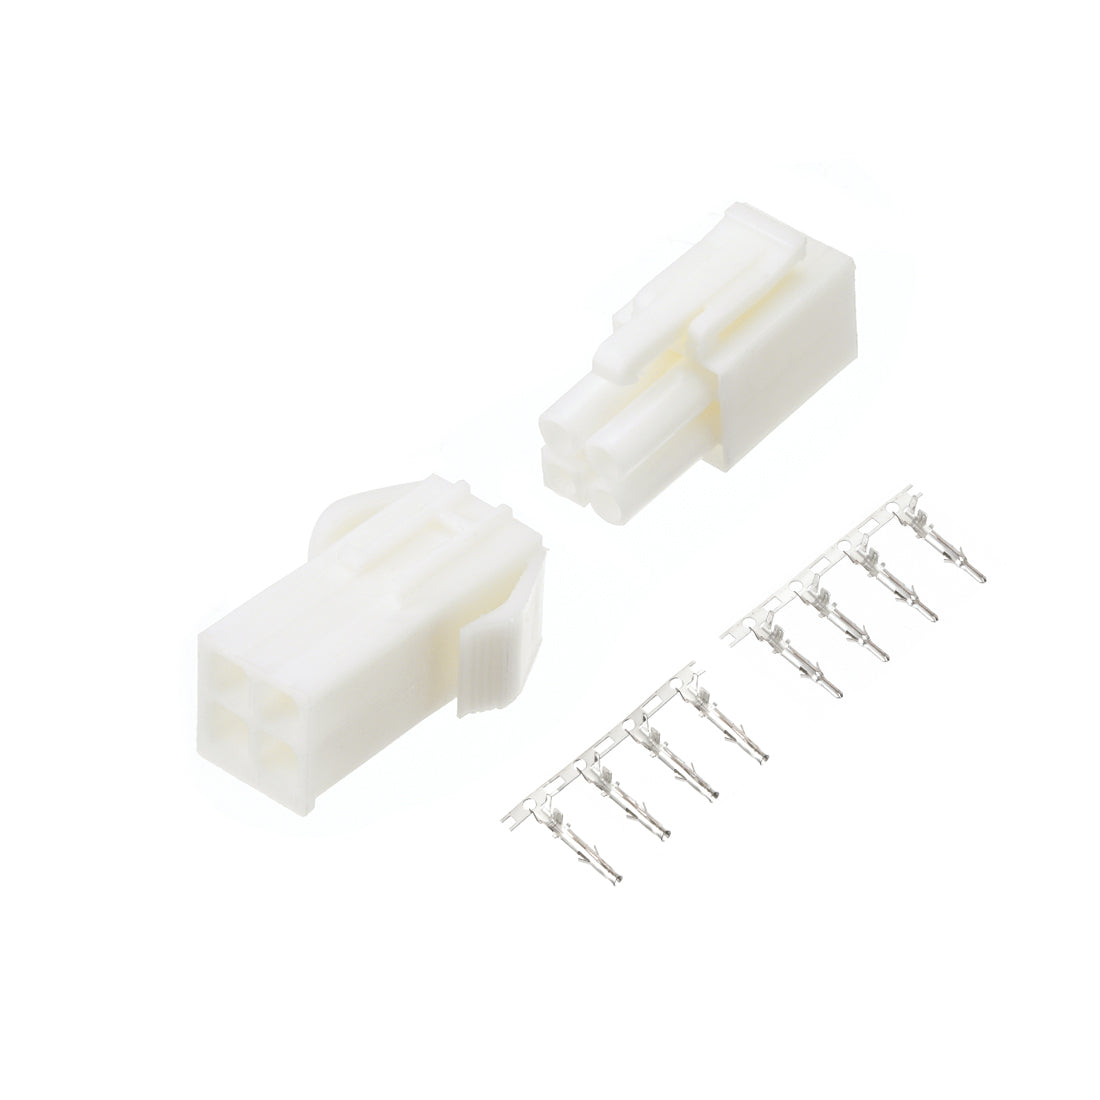 uxcell Uxcell 4.5mm 4 Pin White Plastic Male Female -SM Housing Crimp Terminal Connector